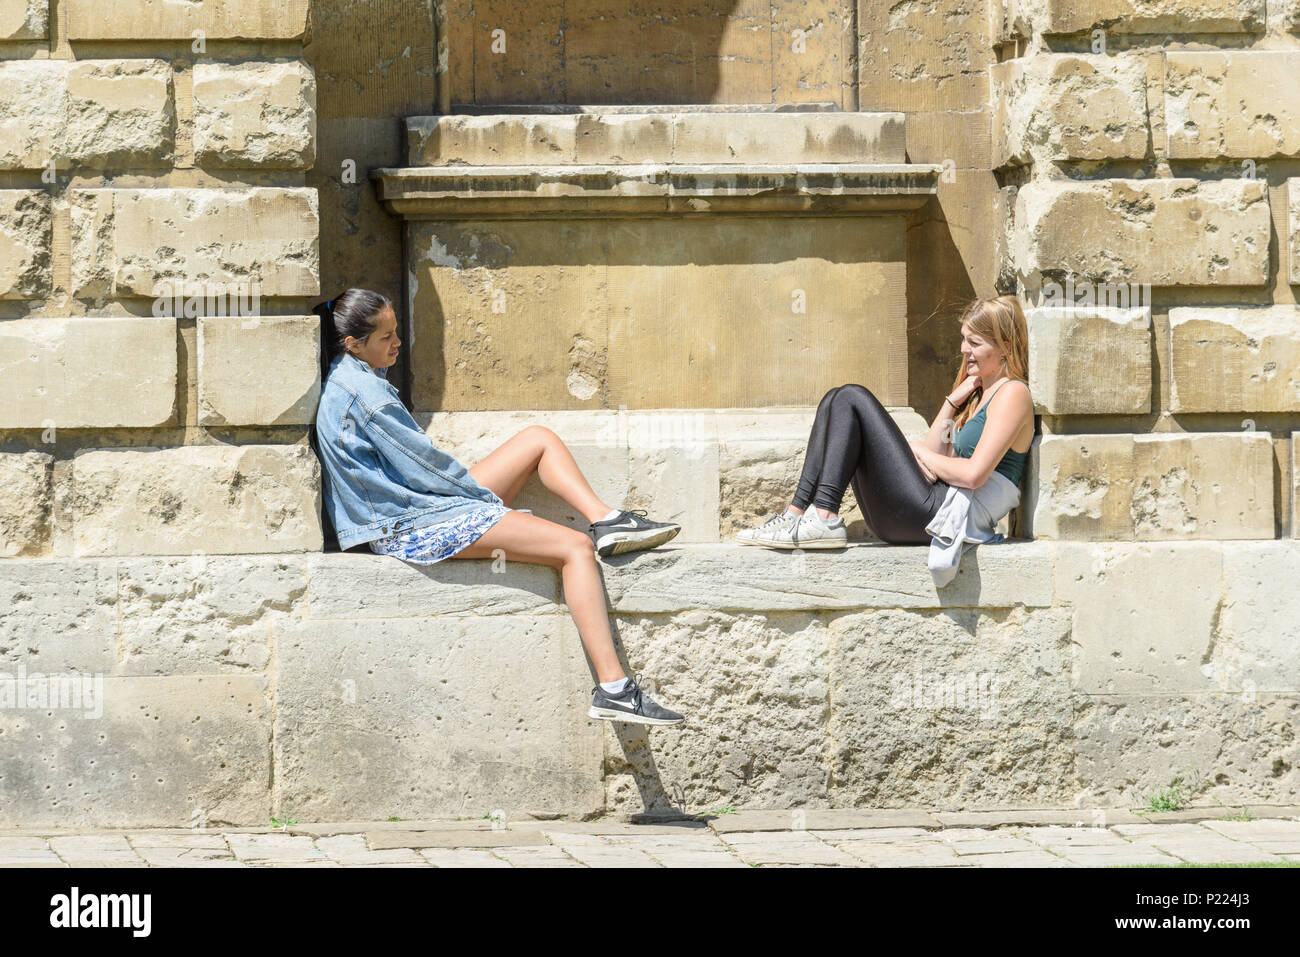 Two female students sit talking on a ledge at the Radcliffe Camera Bodleian library during a sunny summer day at the university of Oxford, England. Stock Photo